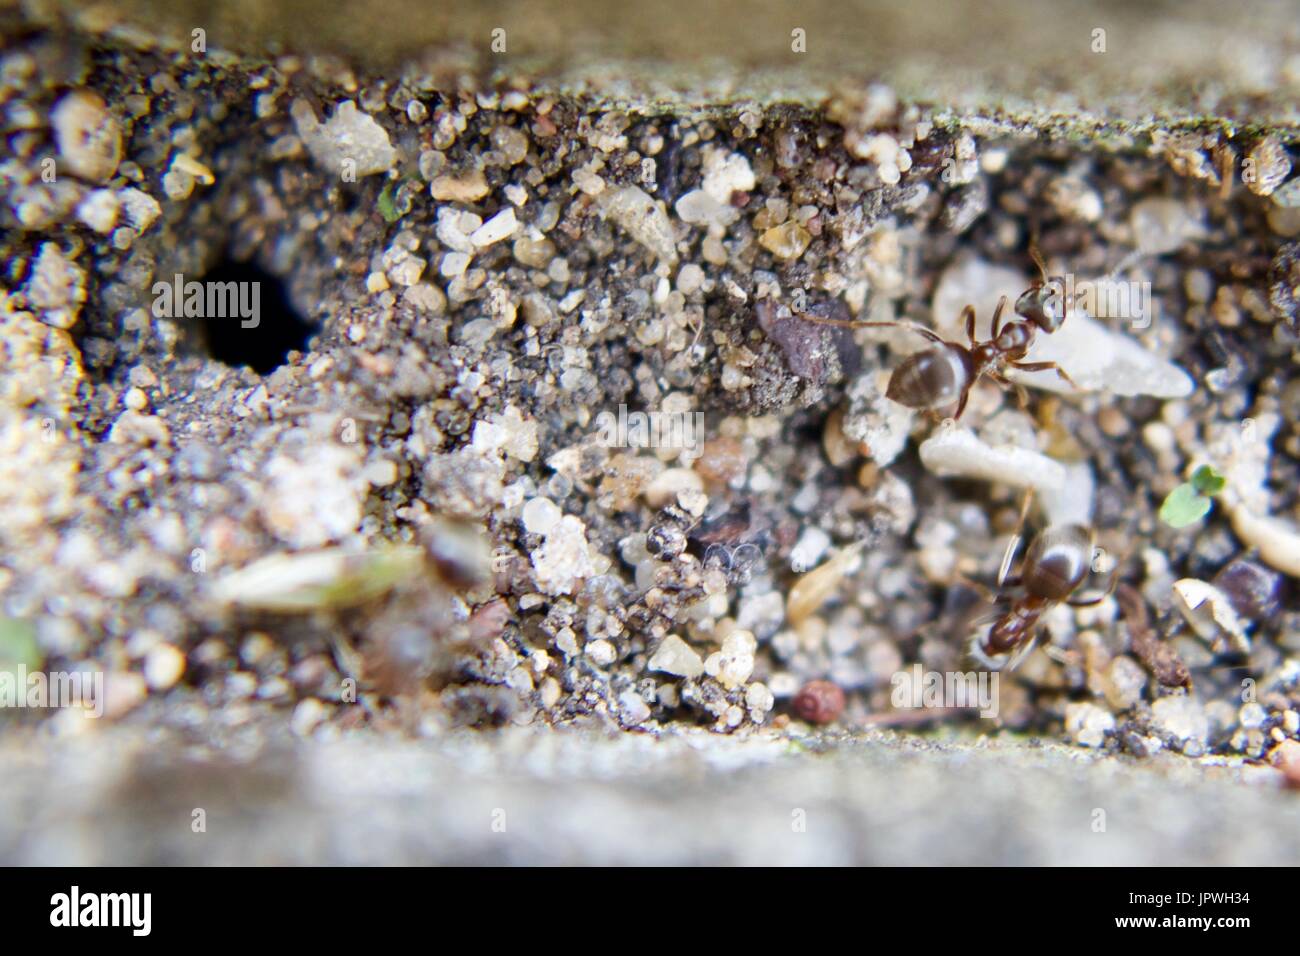 Two small brown ants in natural tunnel. Wild animals macro photography ...